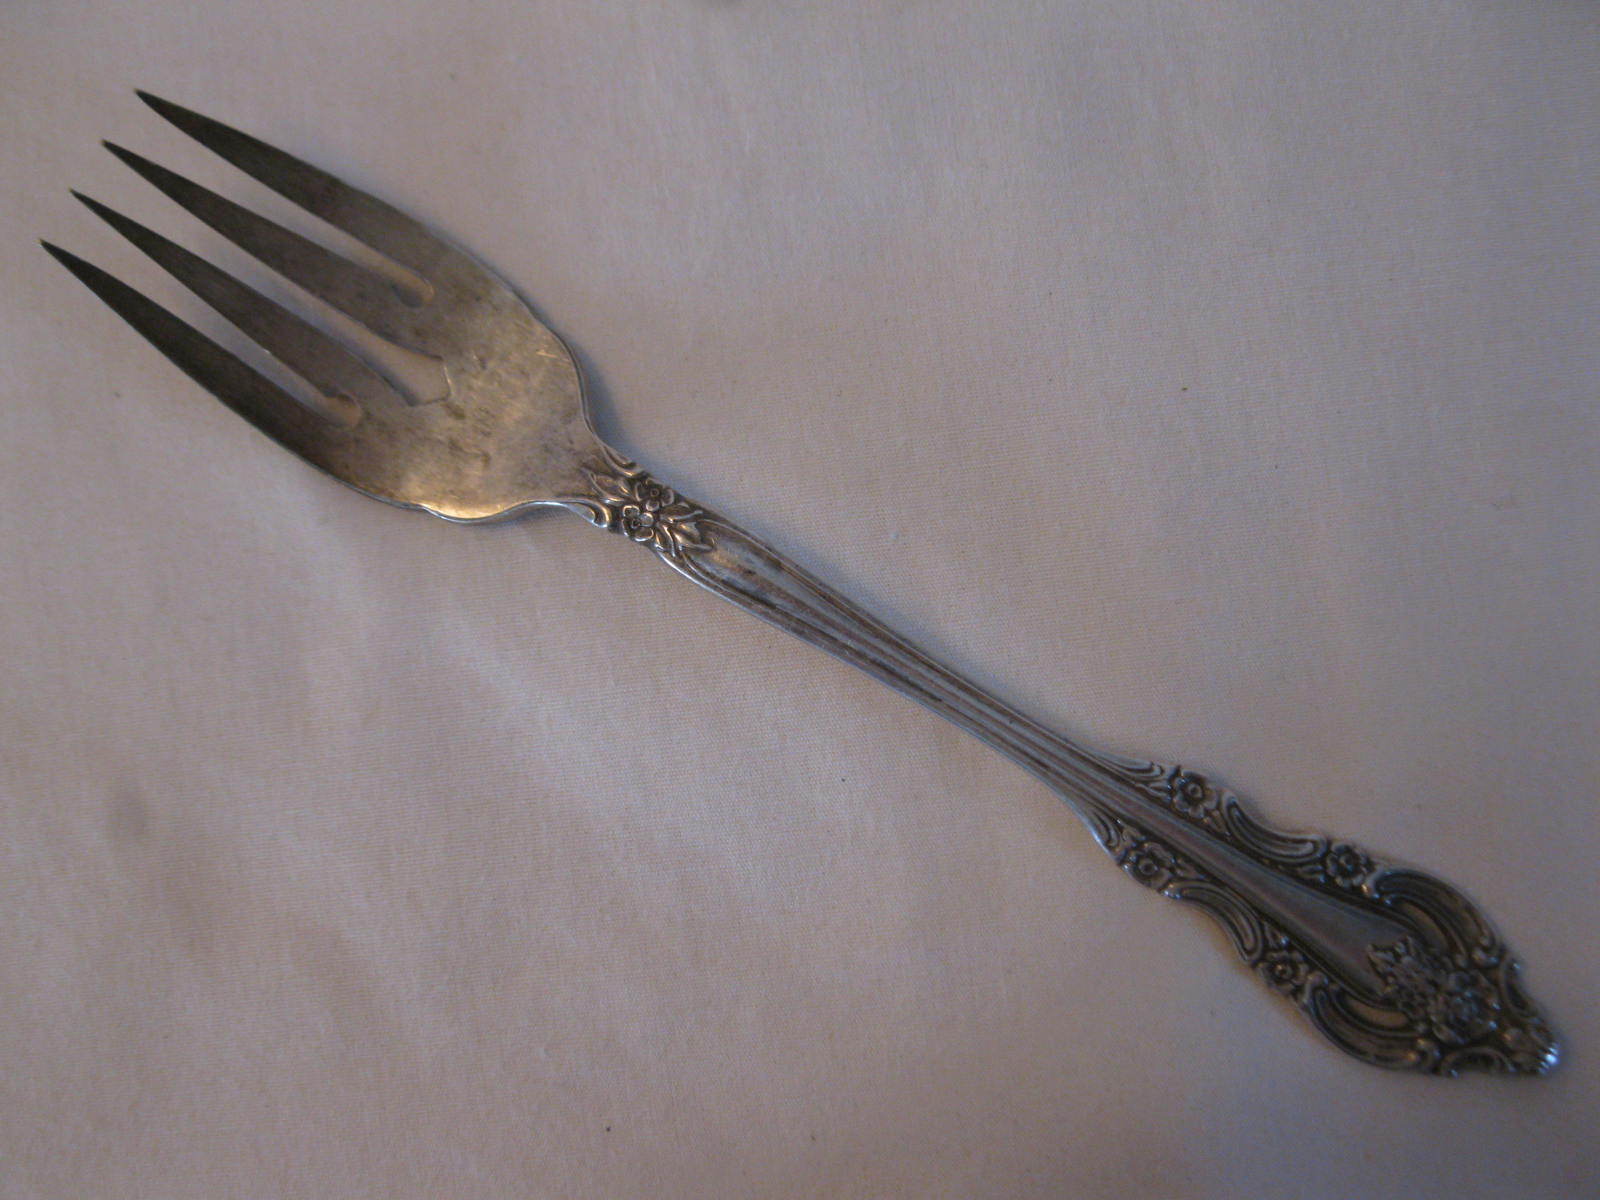 Community 1965 Silver Artistry Pattern Silver Plated 7" Salad Fork - $7.50